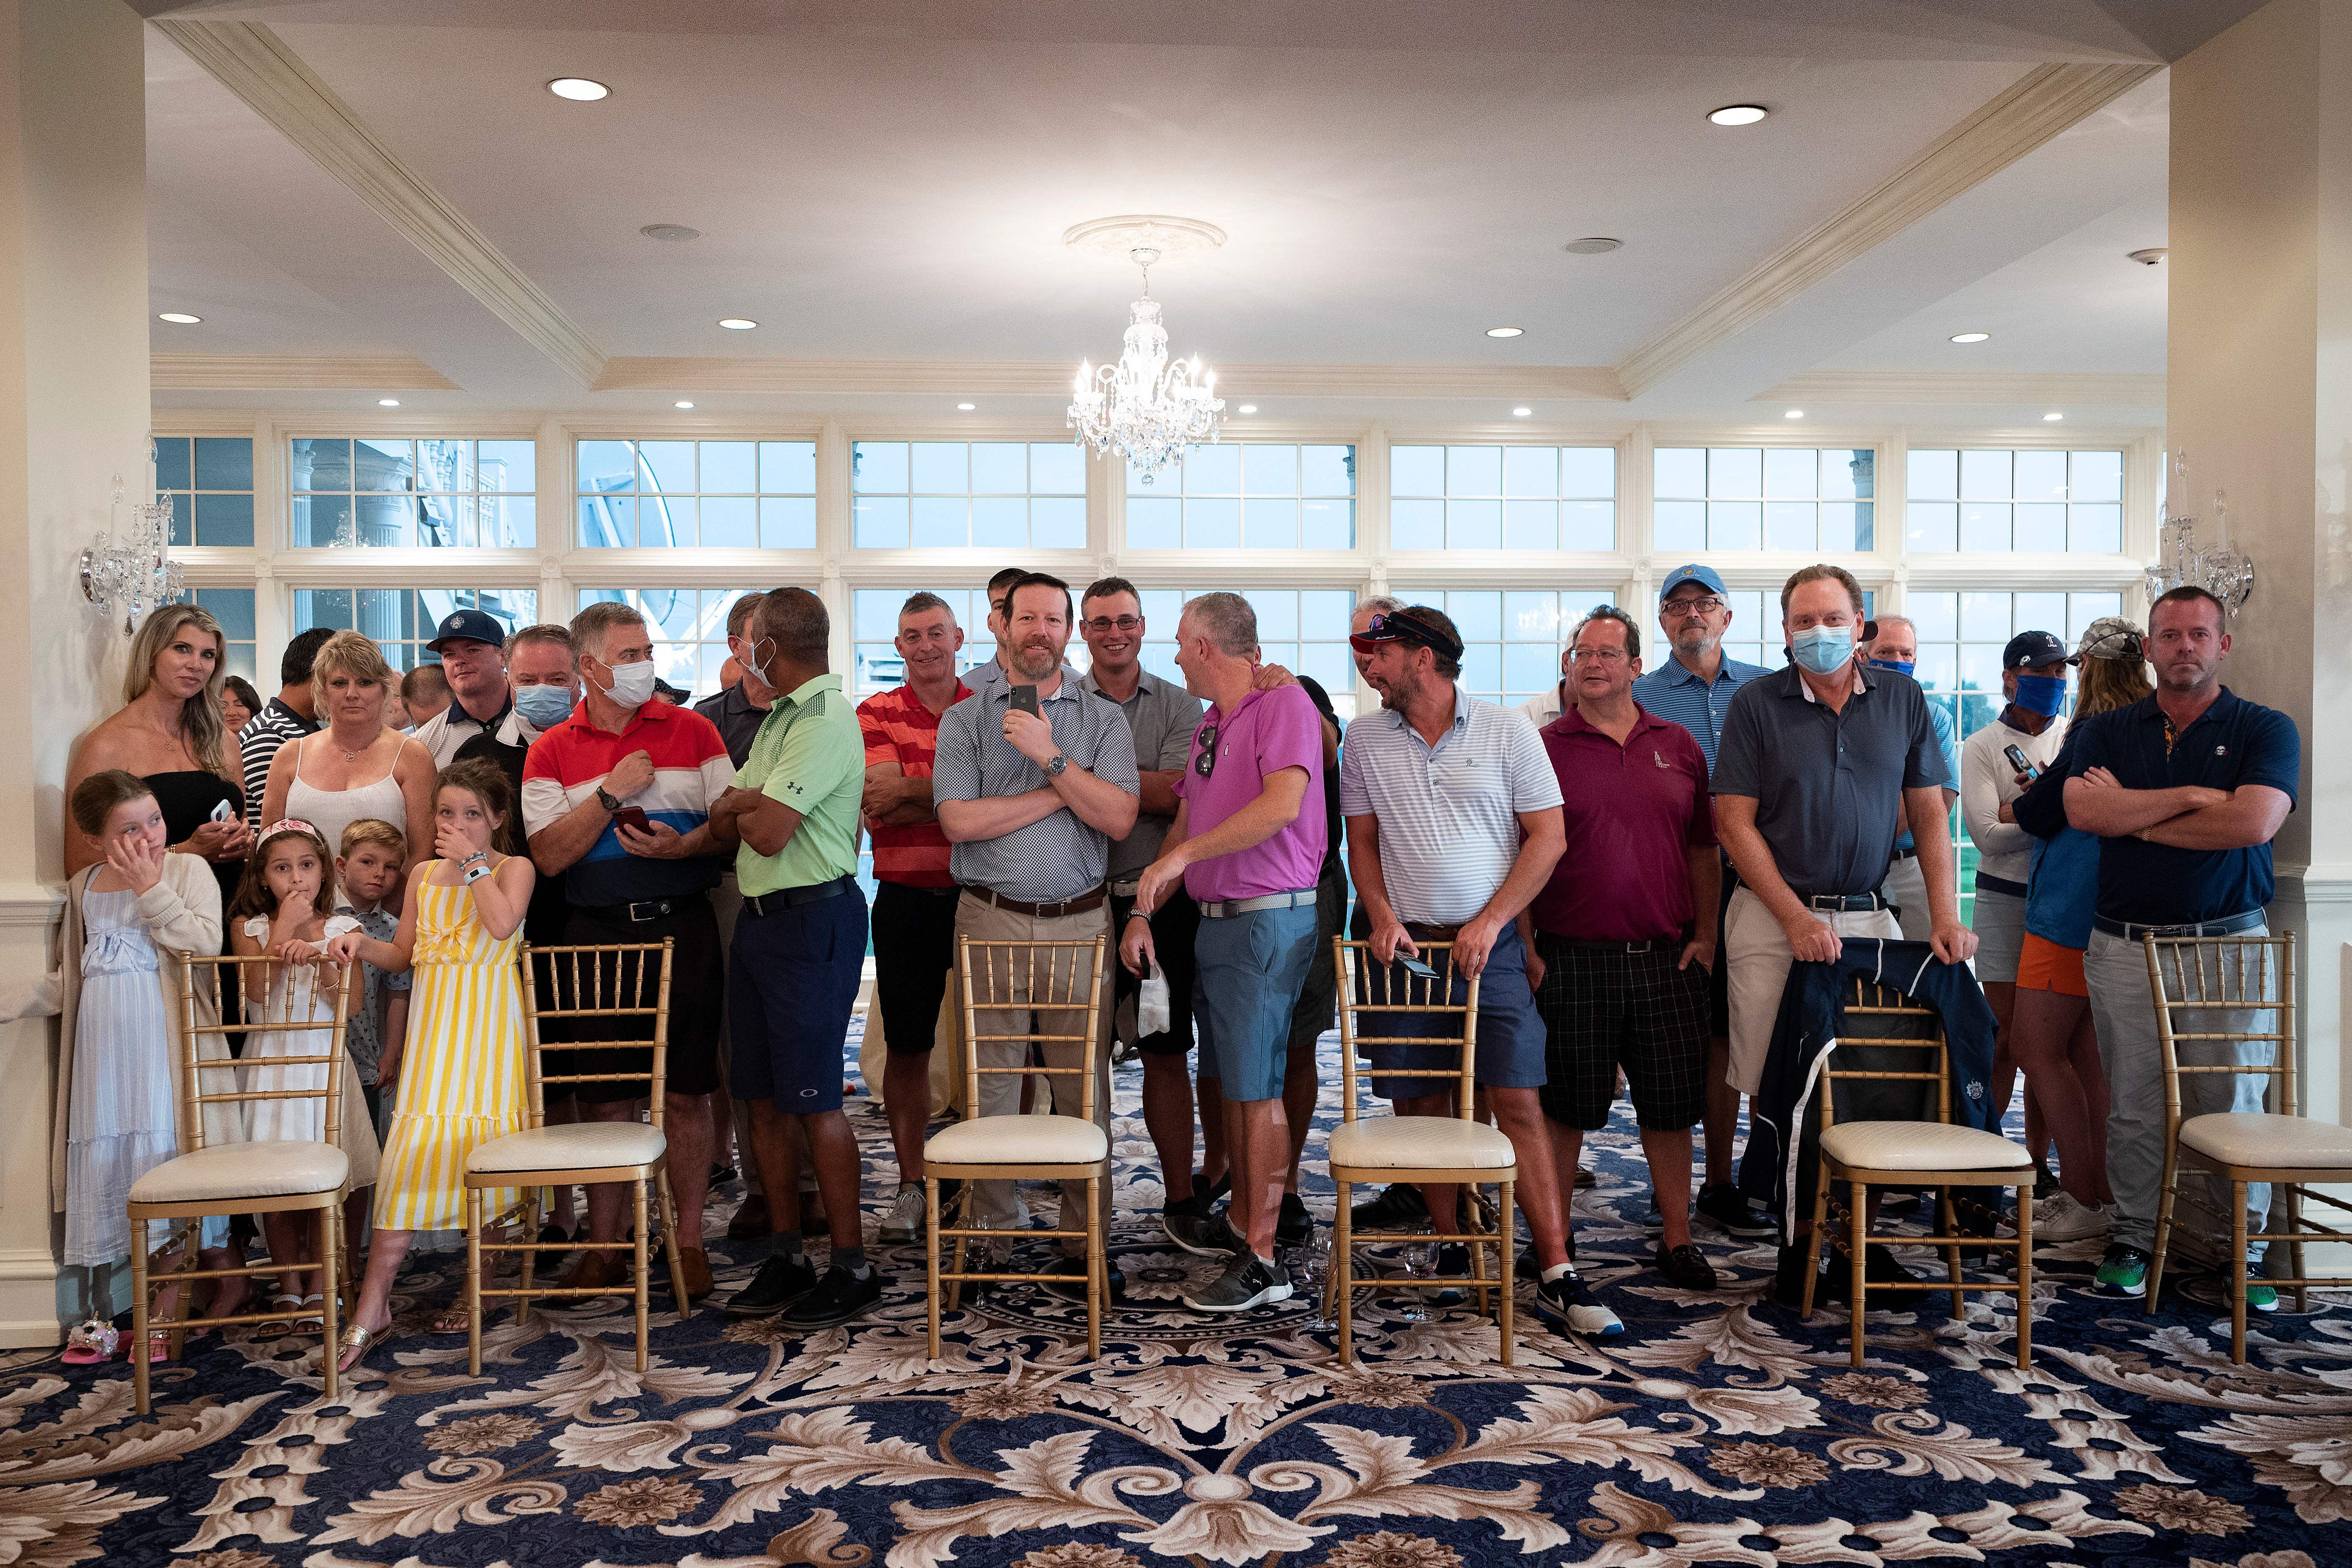 Country club members, few wearing facemasks, await the president's arrival ahead of a news conference in Bedminster, New Jersey, on August 7, 2020.